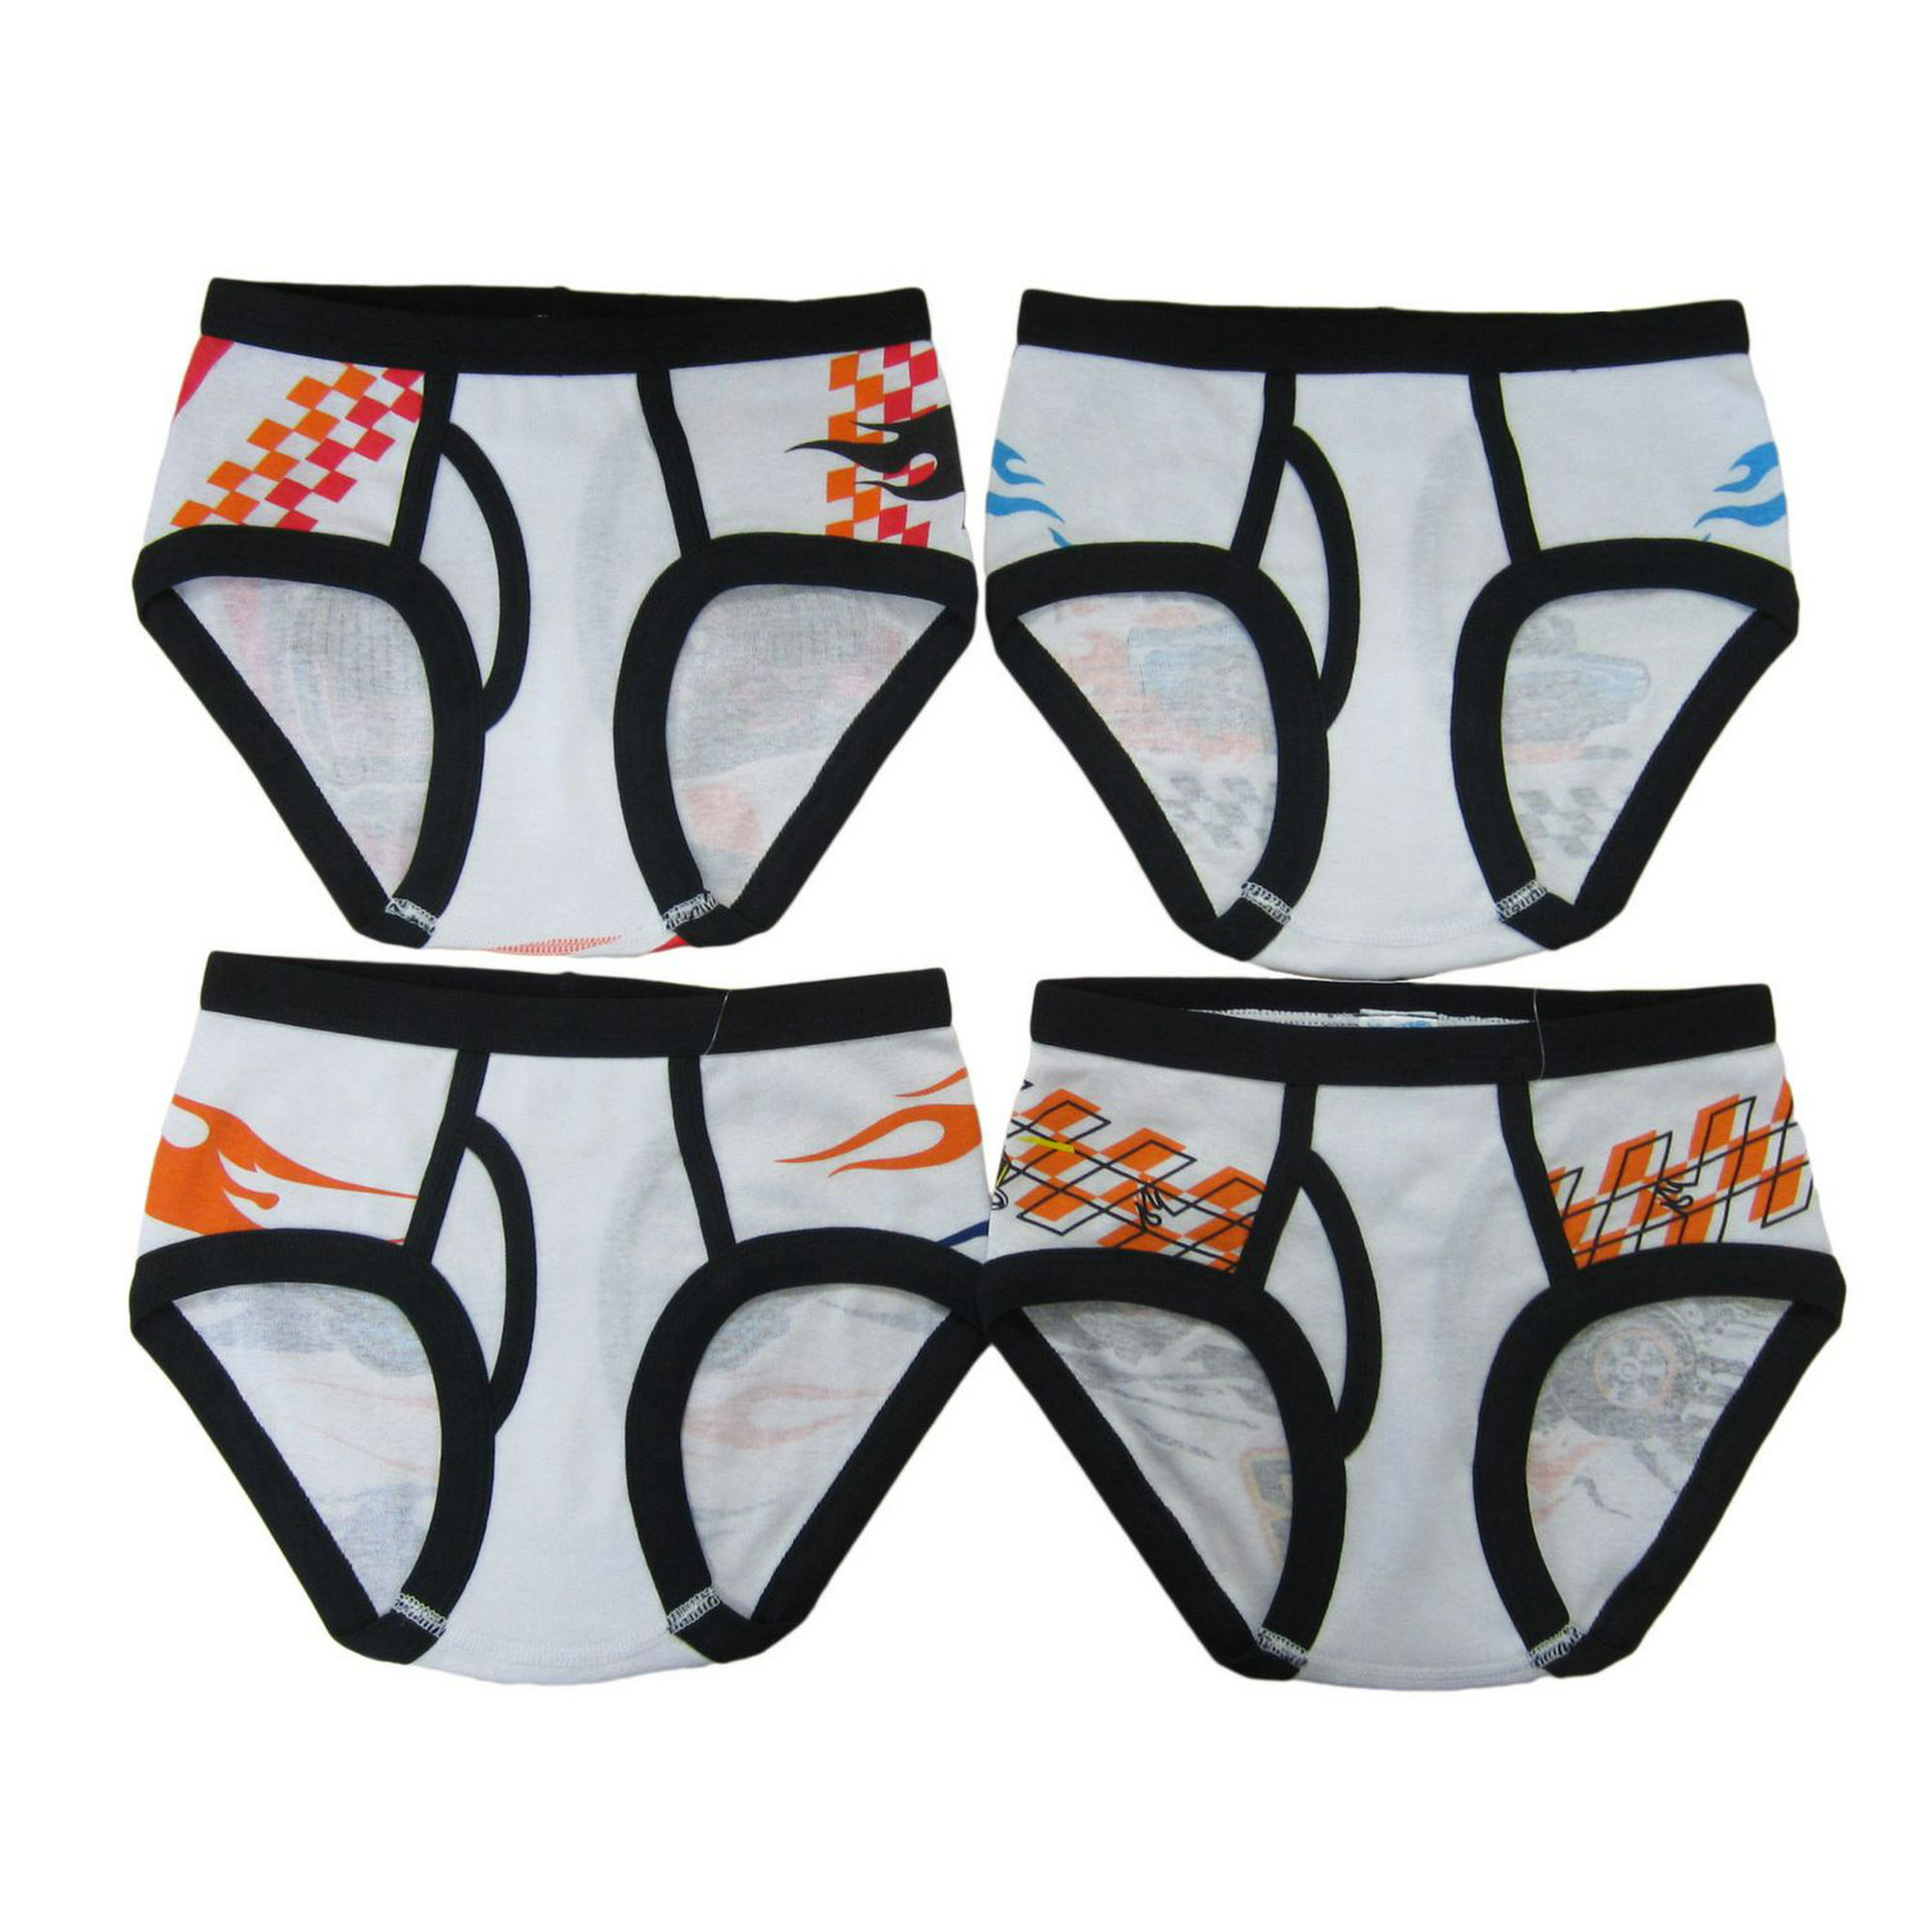 Buy INTIMO Little Boys' Batman 3 Pack Brief, Multi, 4T/5T at